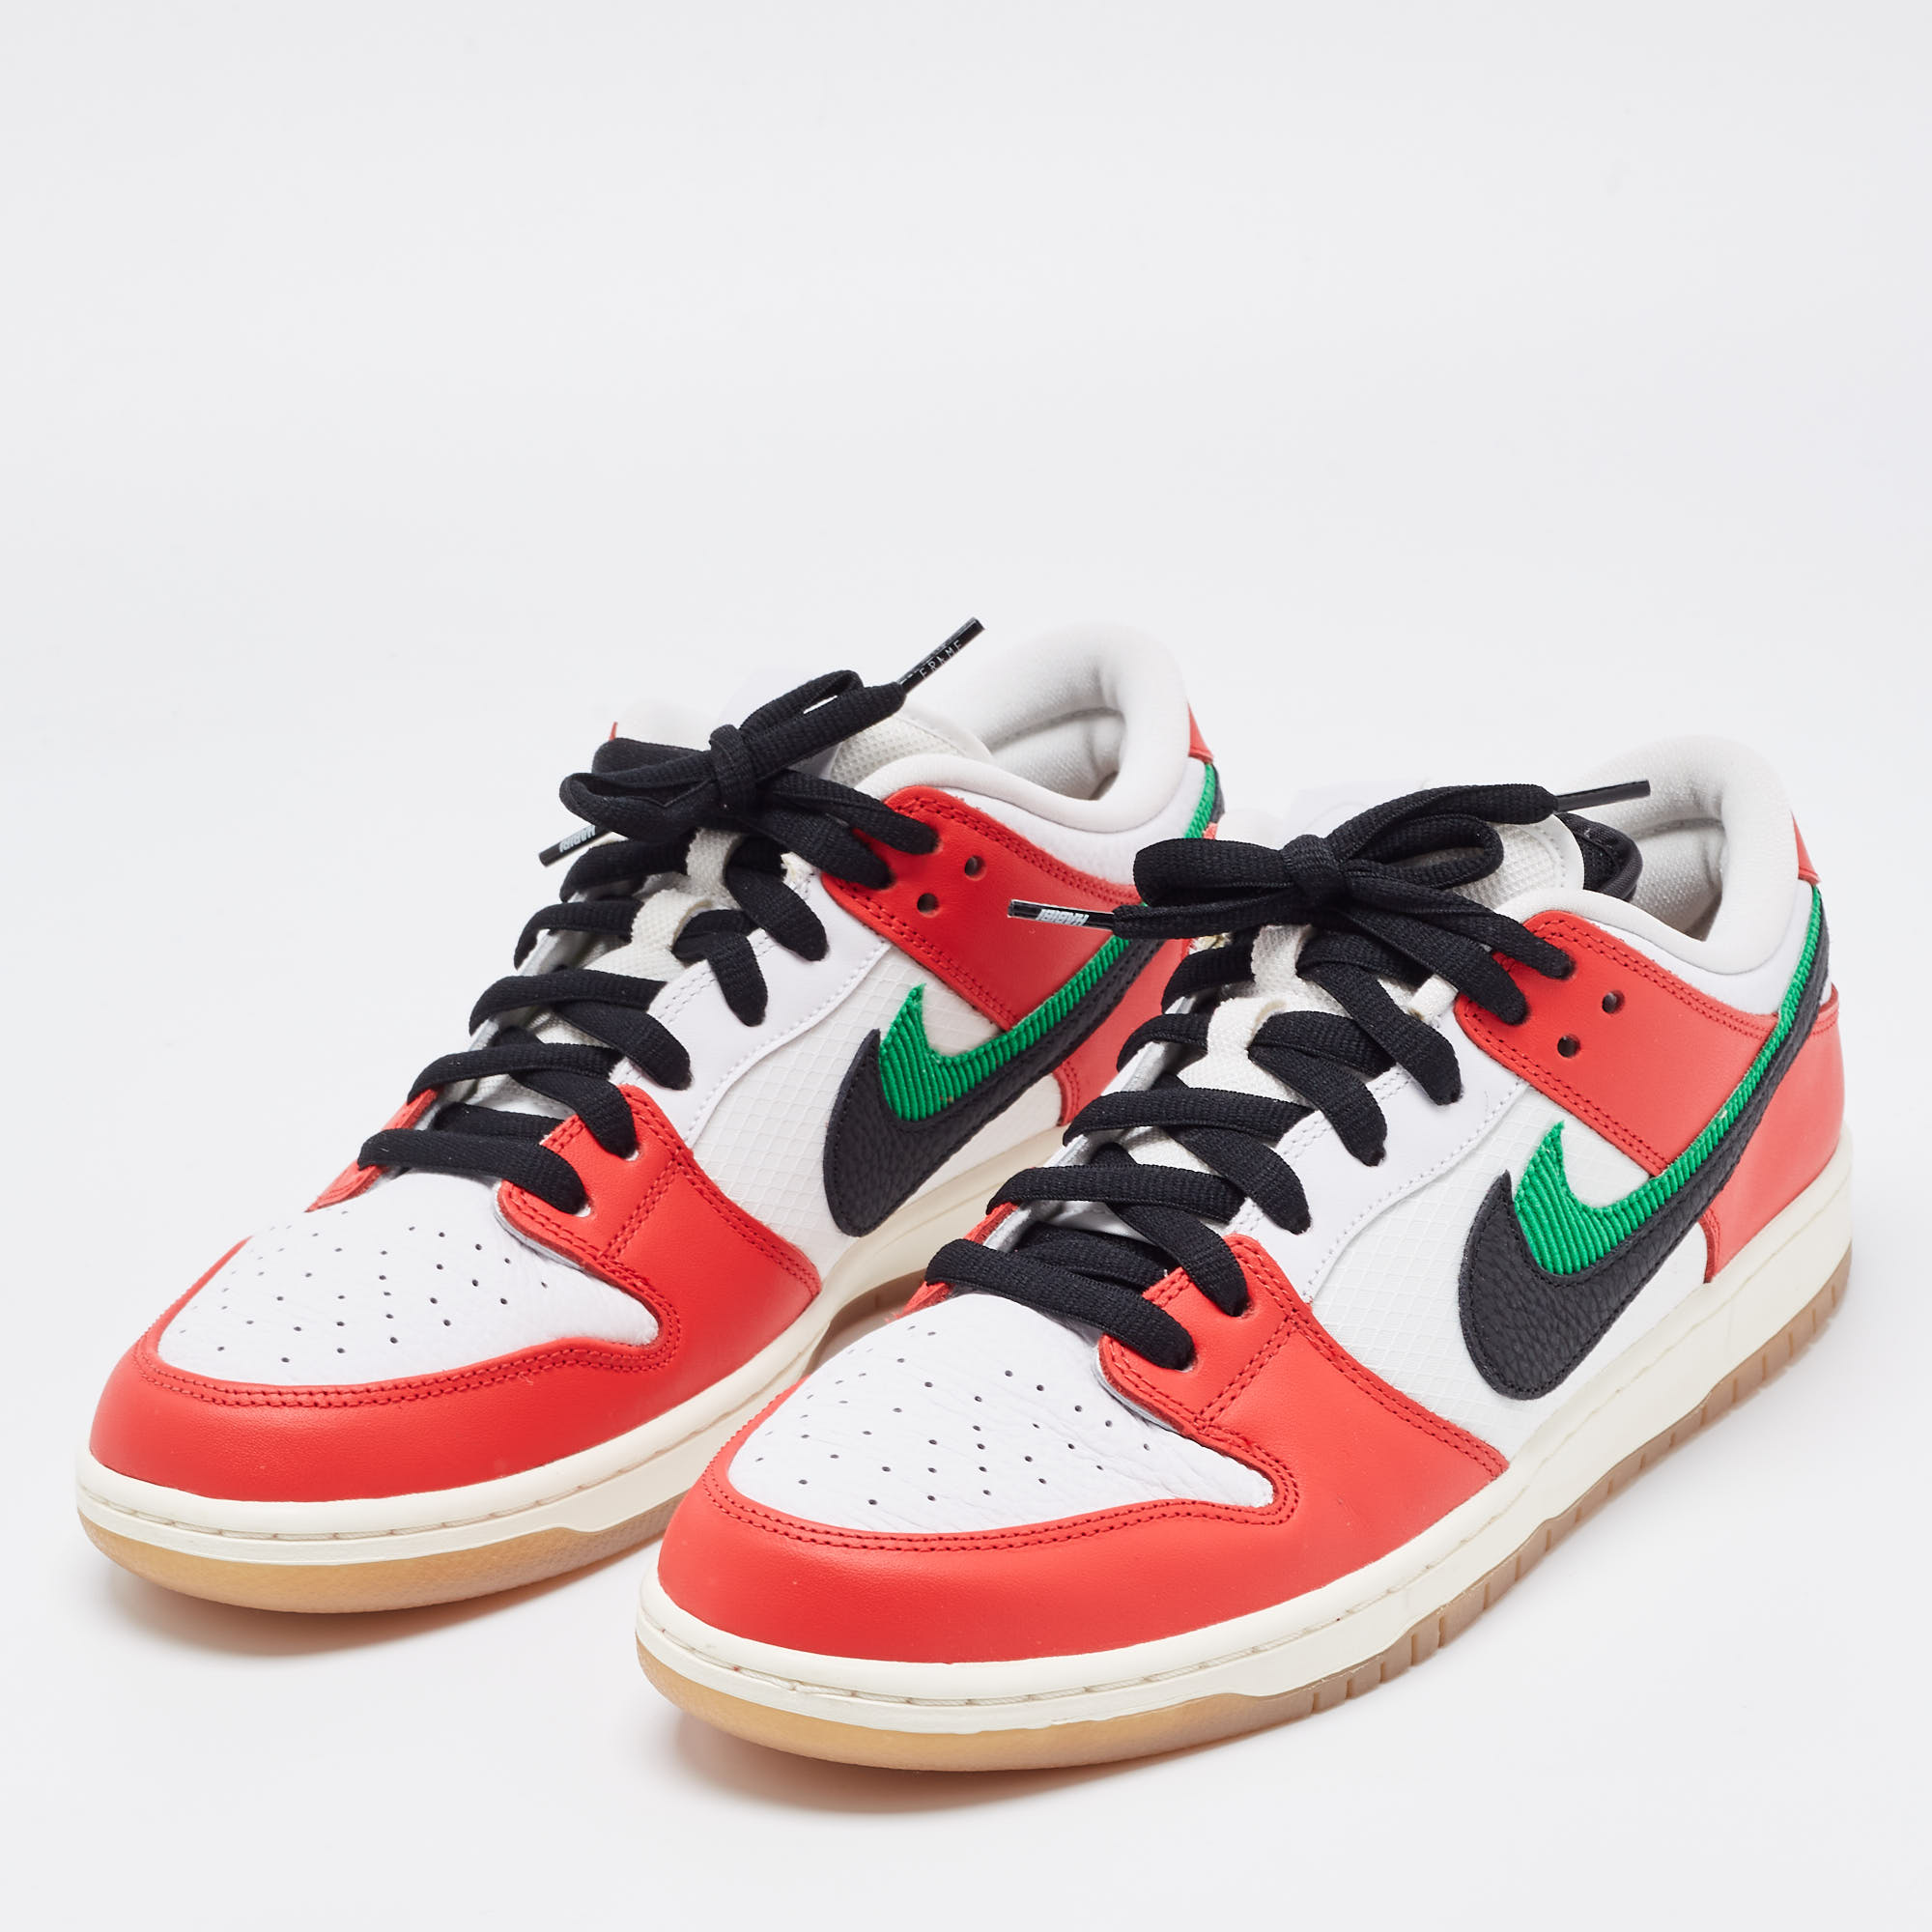 

Nike Multicolor Leather SB Dunk Low Frame Skate Habibi Sneakers Size